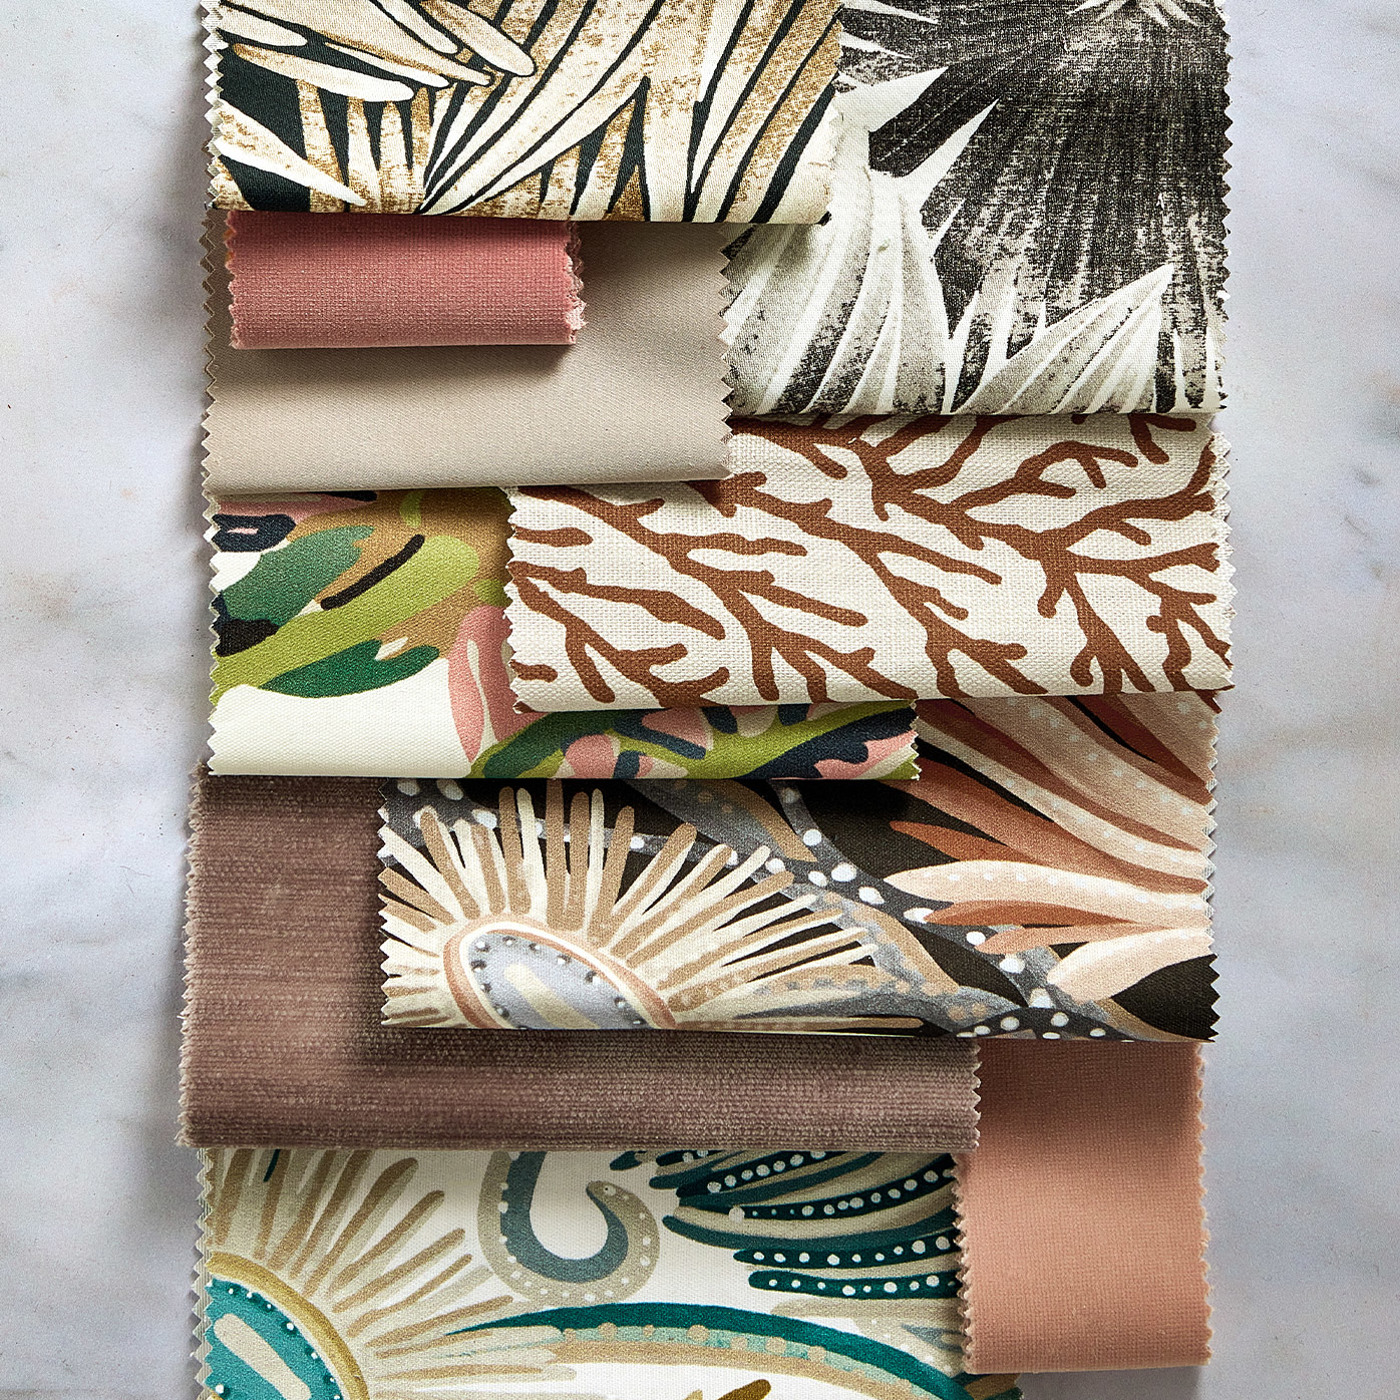 Perennials Grounded/Positano/Succulent Fabric by HAR